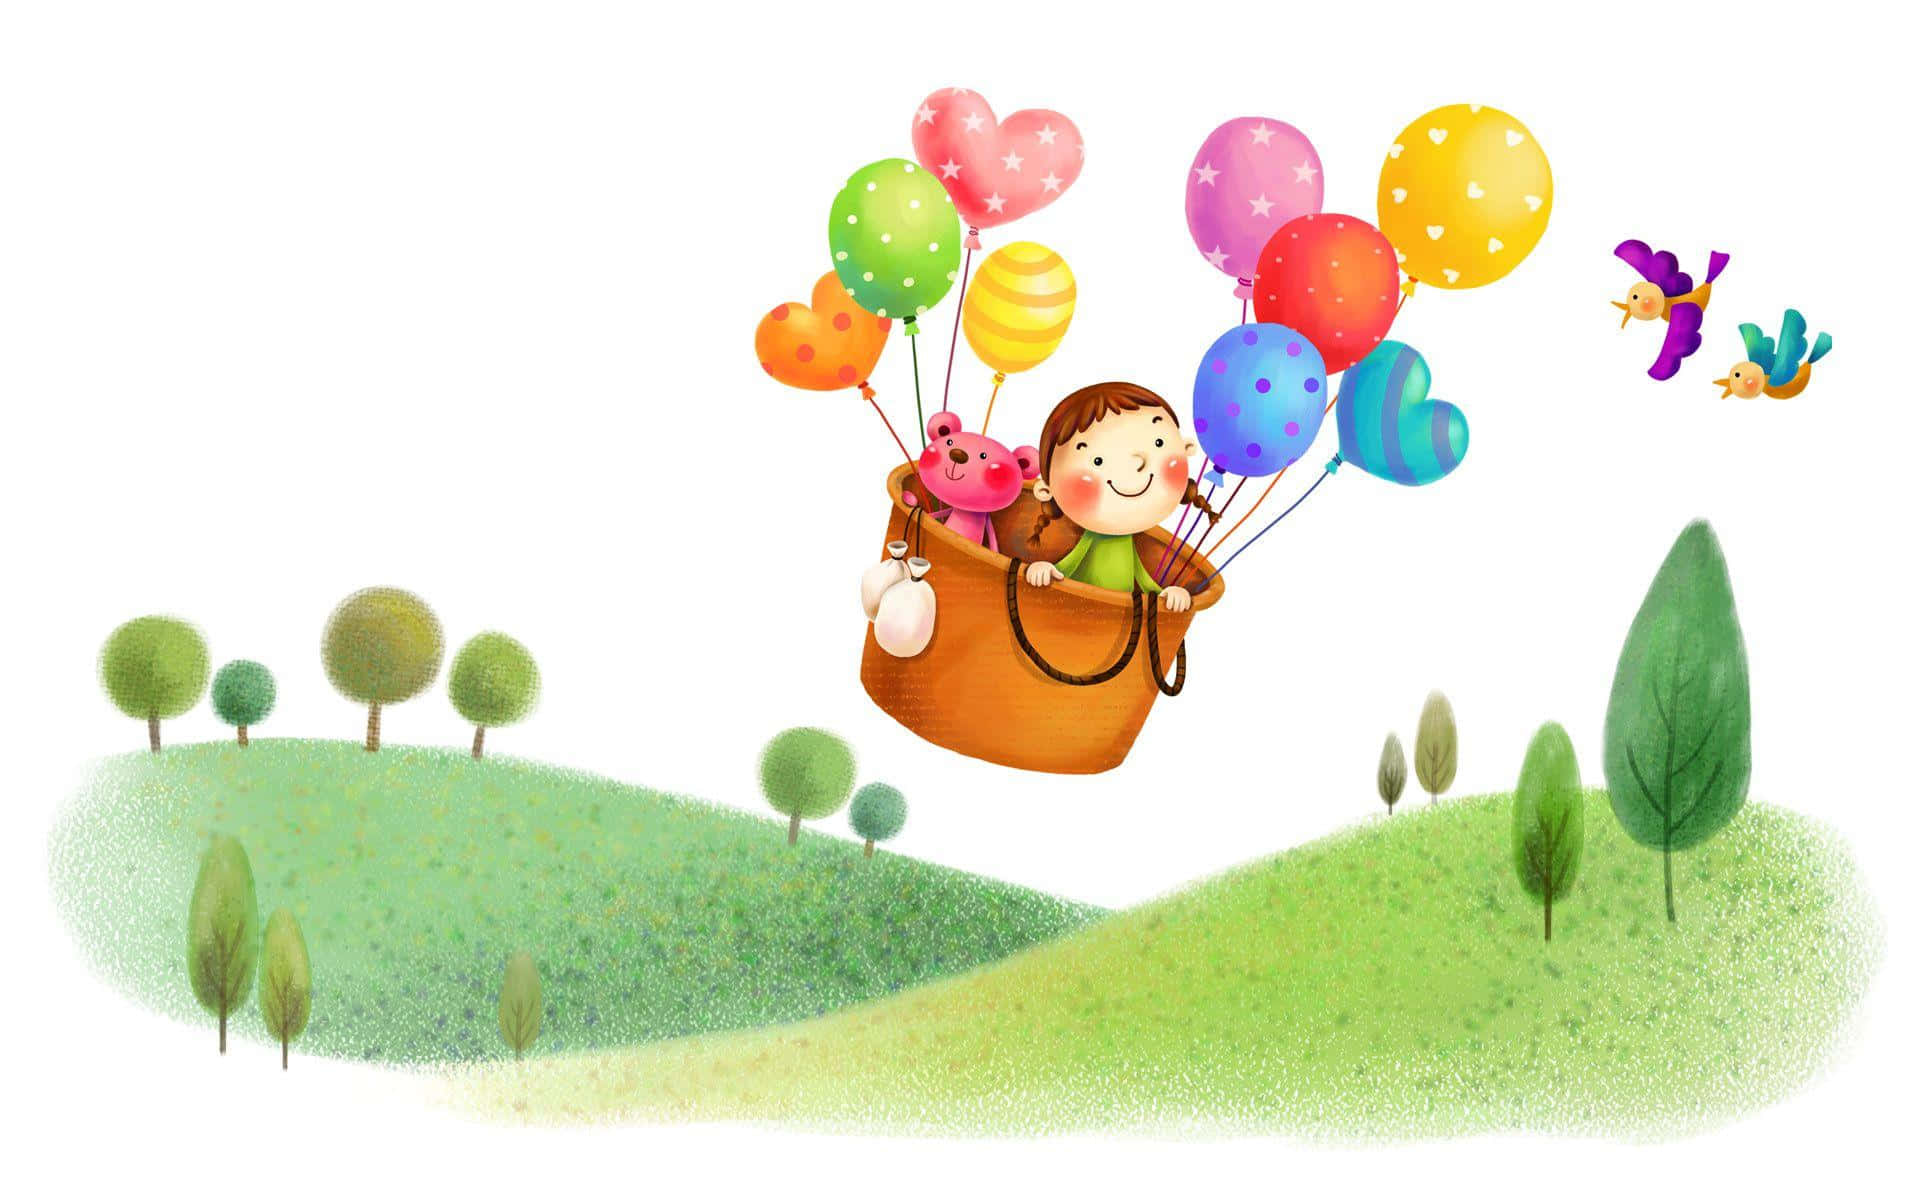 A Girl Is Flying With Balloons